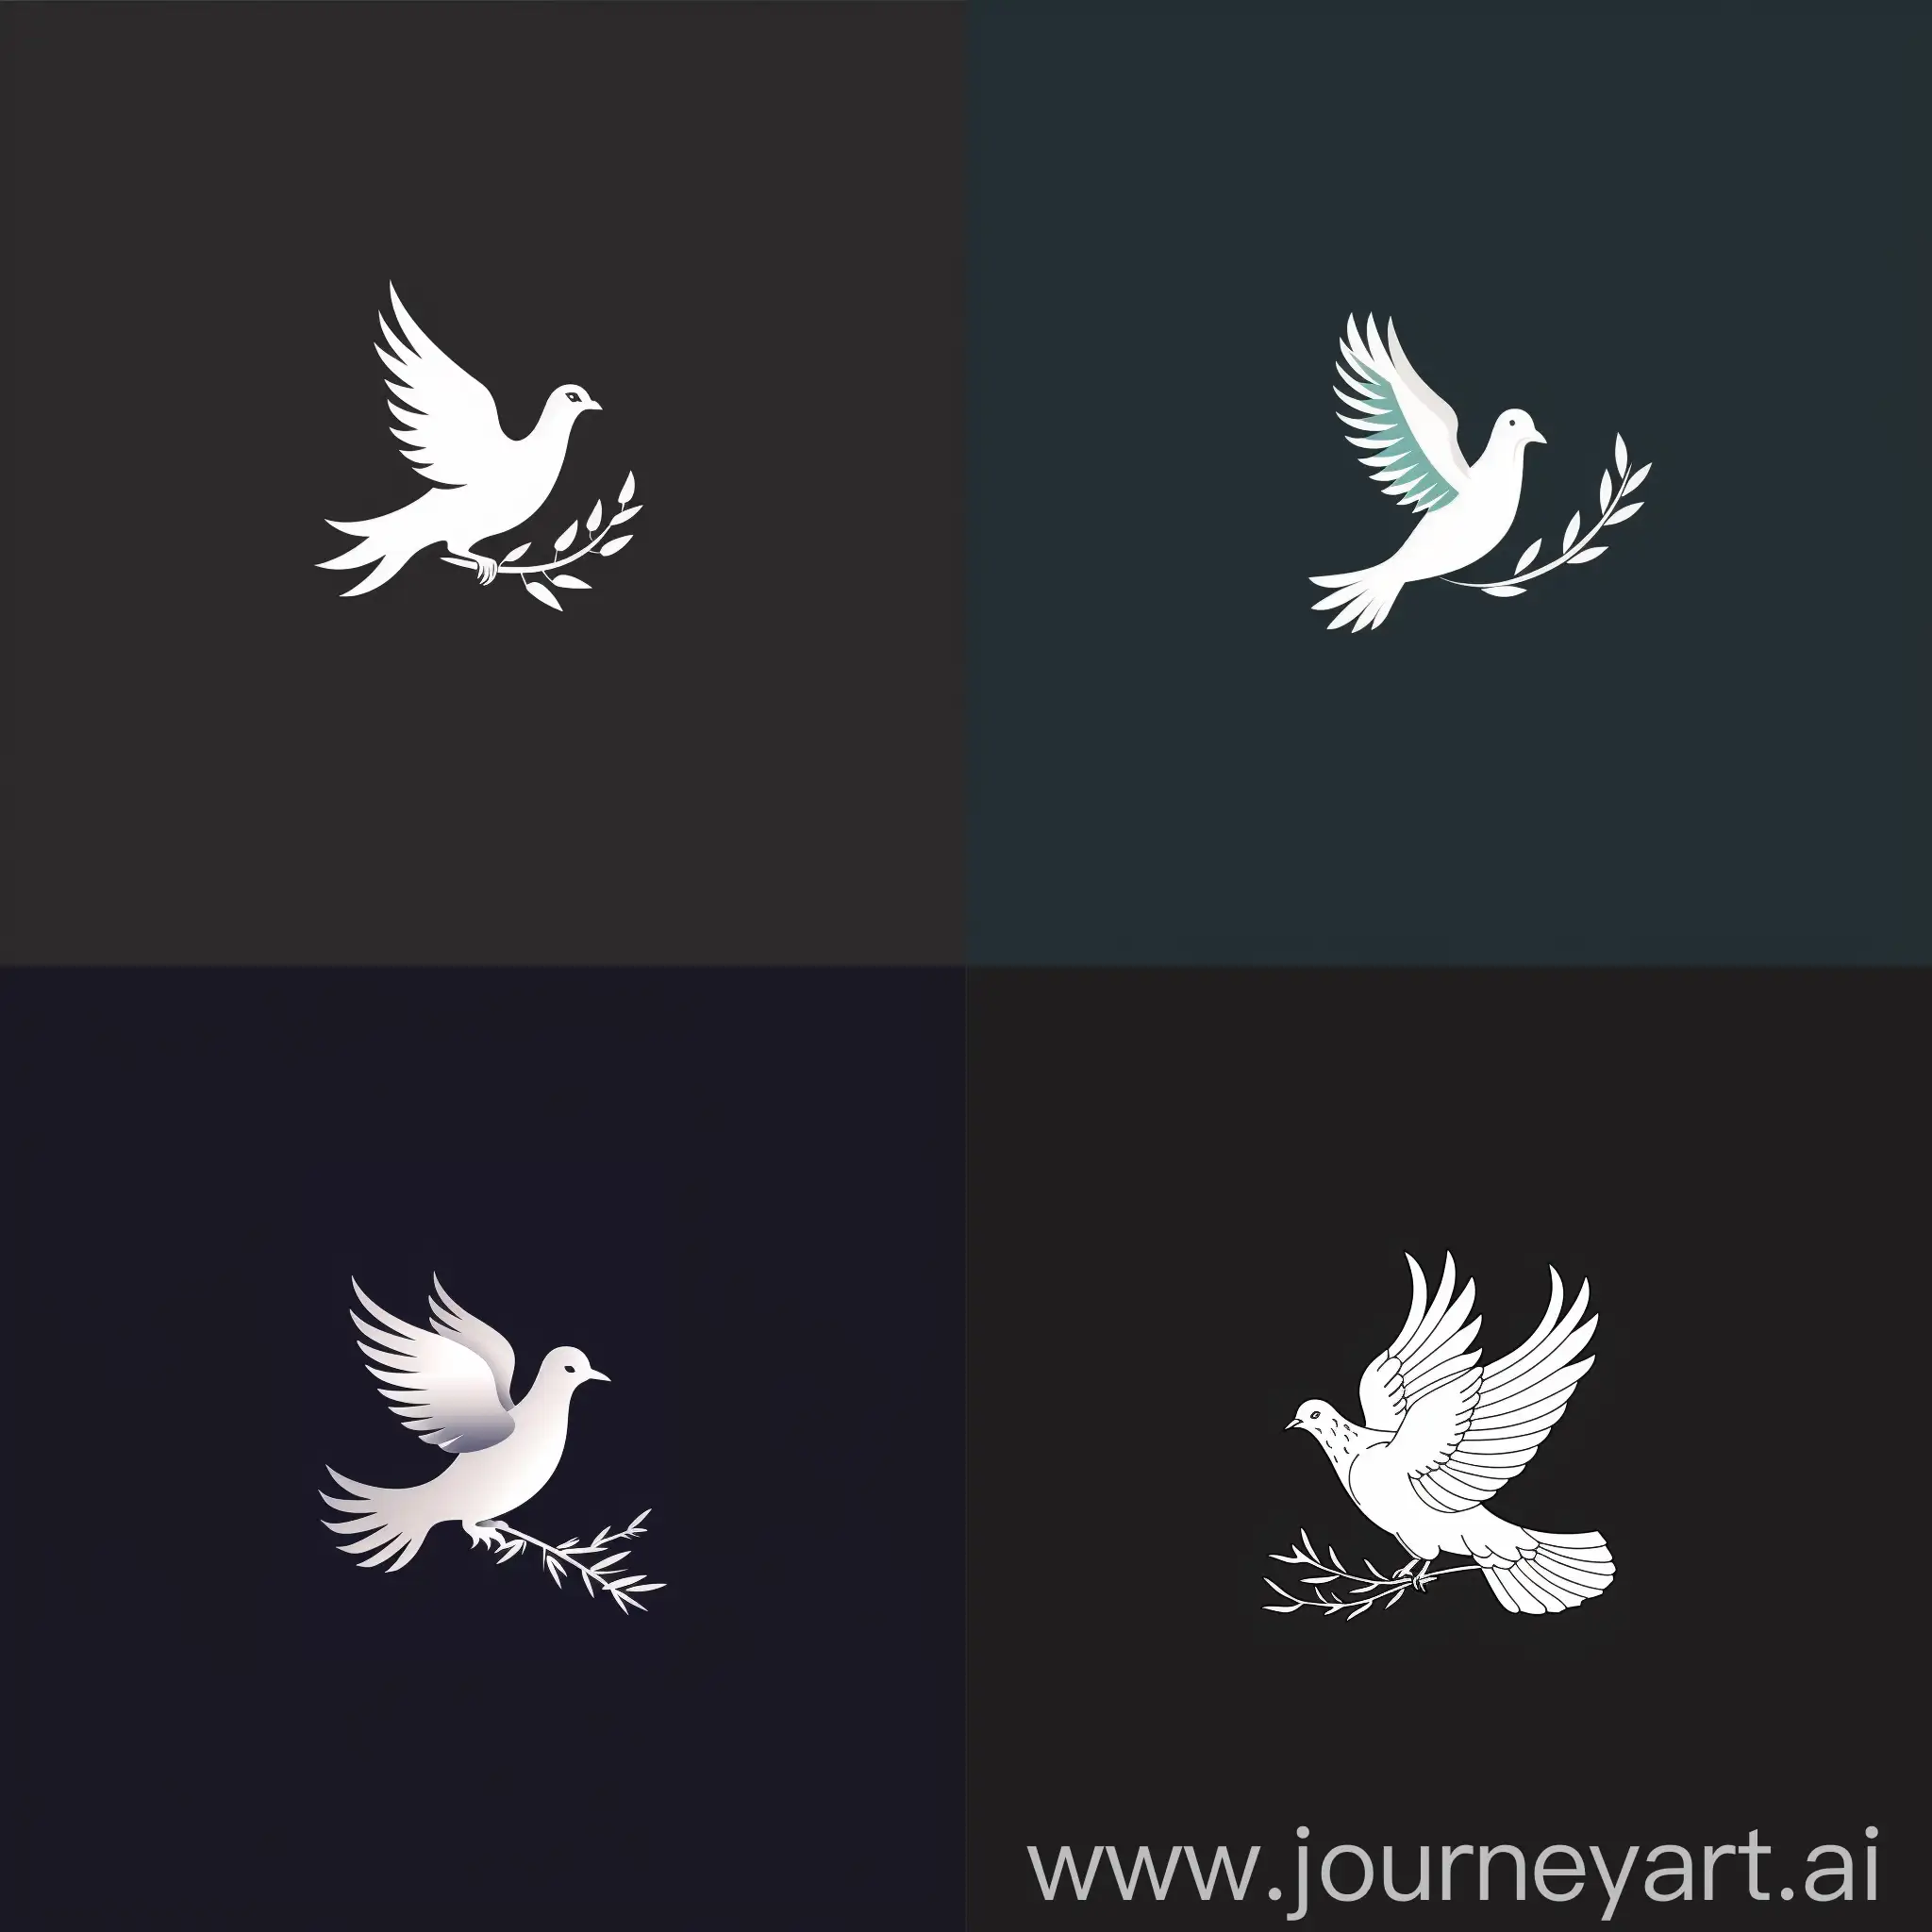 Create a logo featuring a dove, a symbol of peace and prosperity. The dove should be in flight and carrying a branch in its beak to further emphasize the theme of peace.